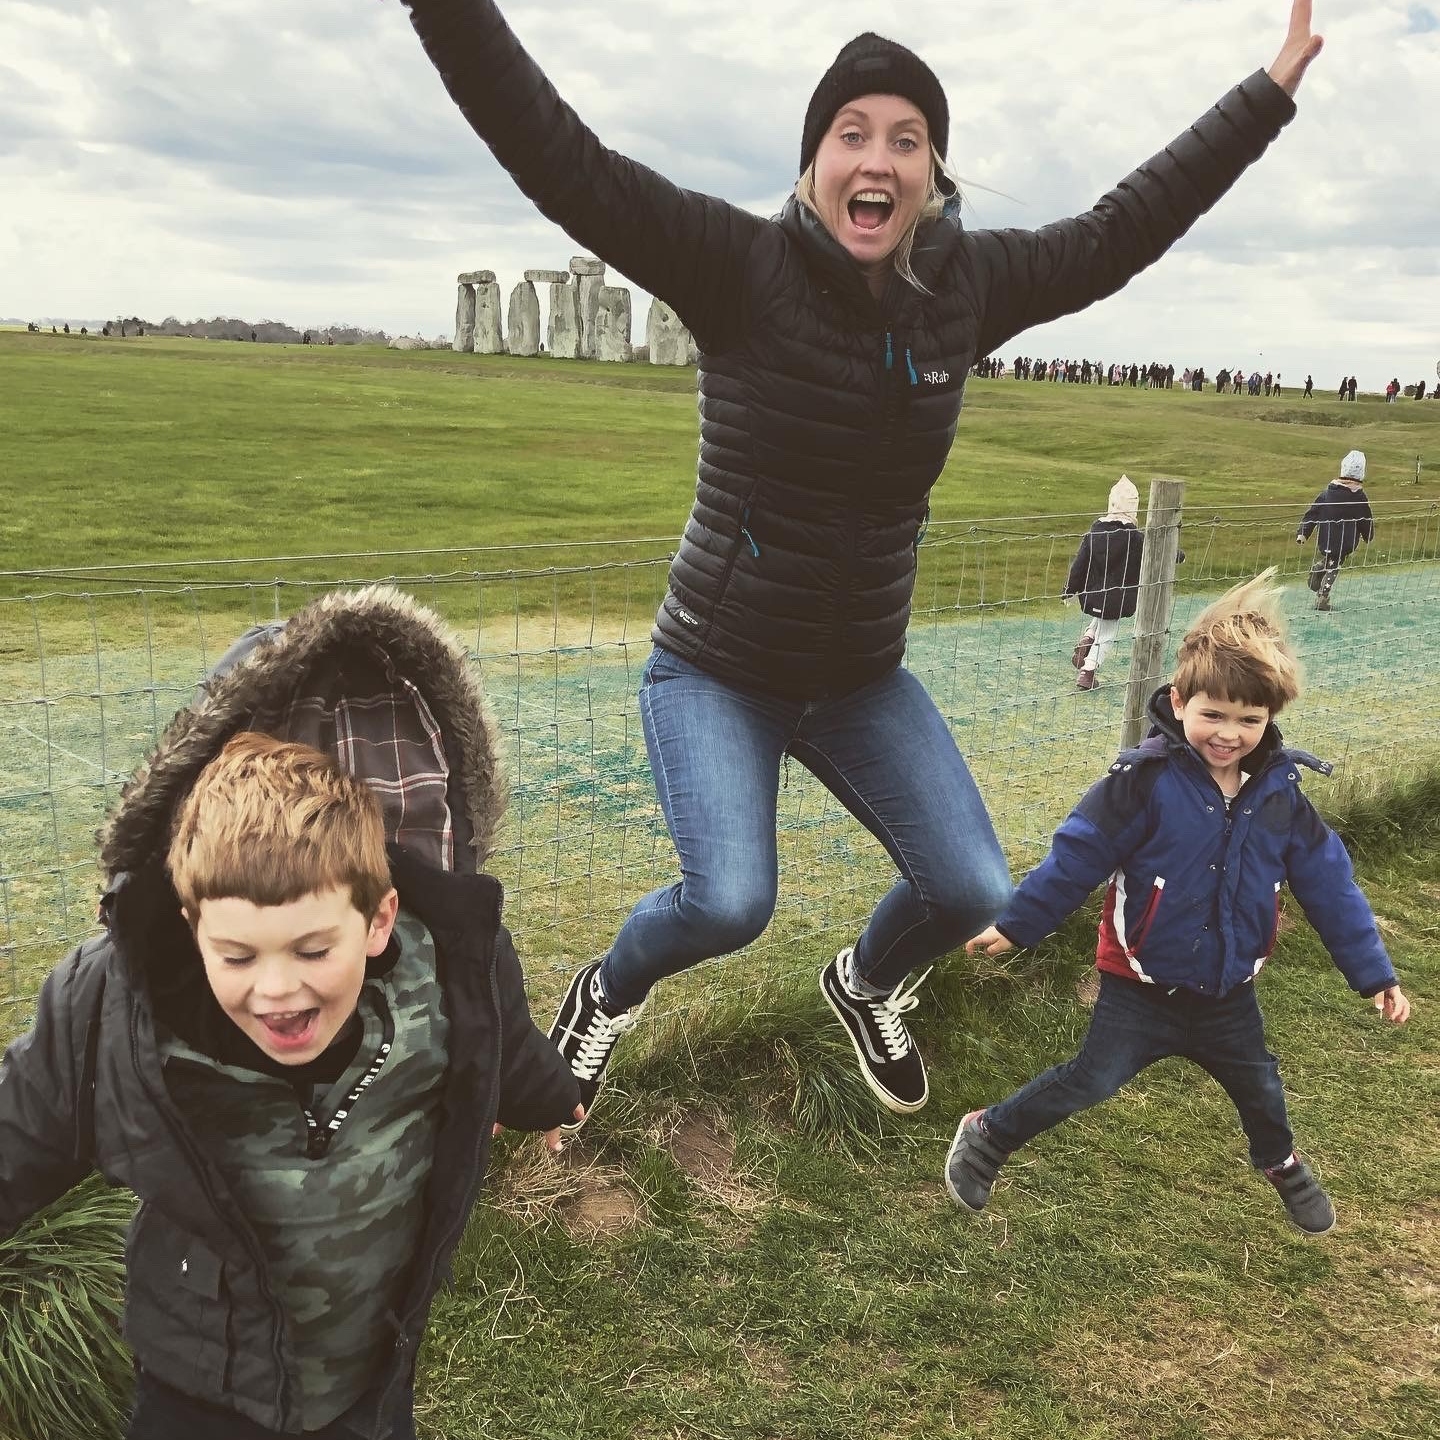 Aaron's wife Becky and their sons doing star jumps in front of Stone Henge